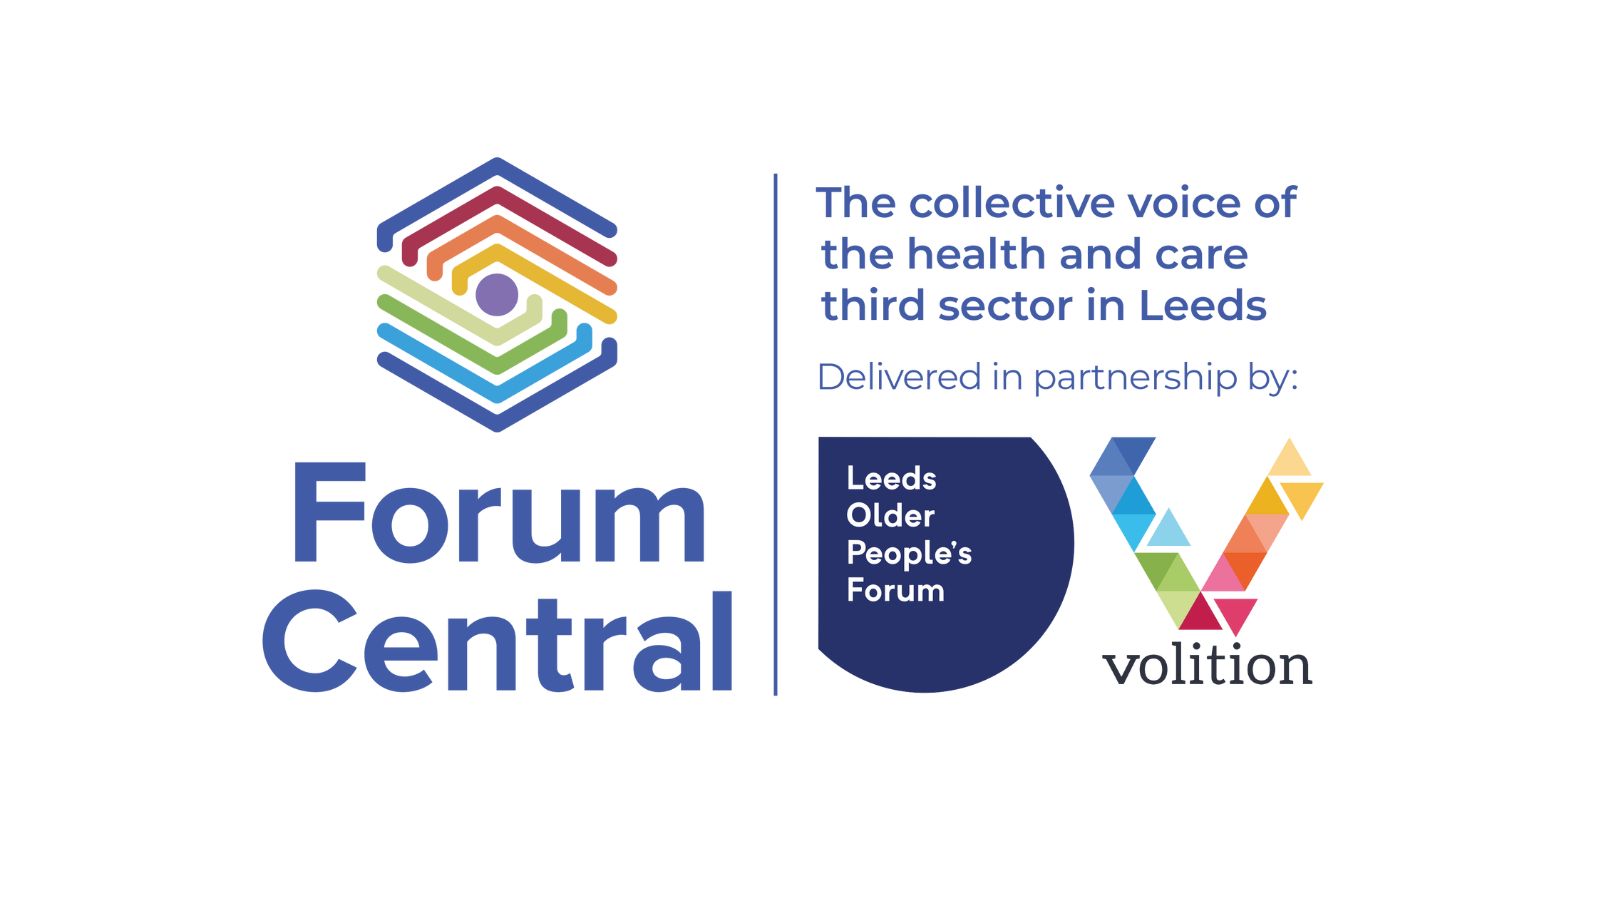 Forum Central partnership logo. The collective voice of the health and care third sector in leeds. Delivered in partnership by Leeds Older People's Forum and Volition